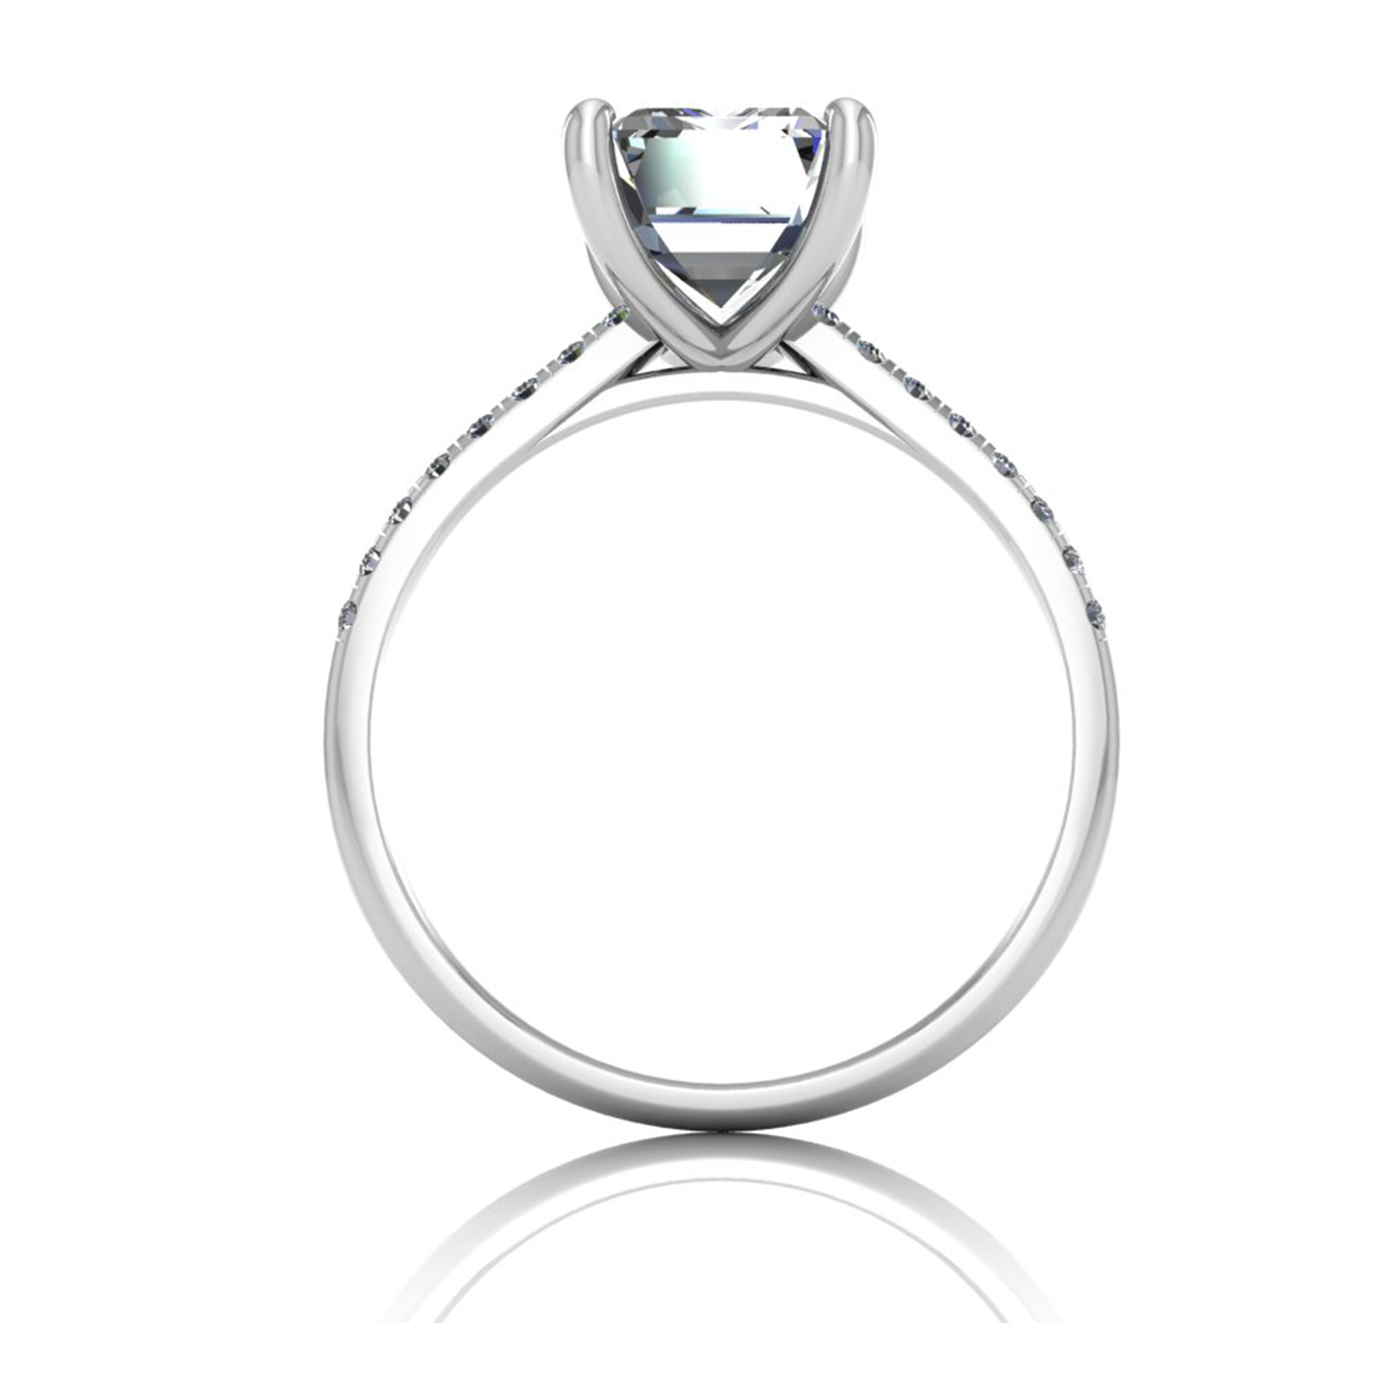 18k white gold 2.5ct 4 prongs emerald cut diamond engagement ring with whisper thin pavÉ set band Photos & images